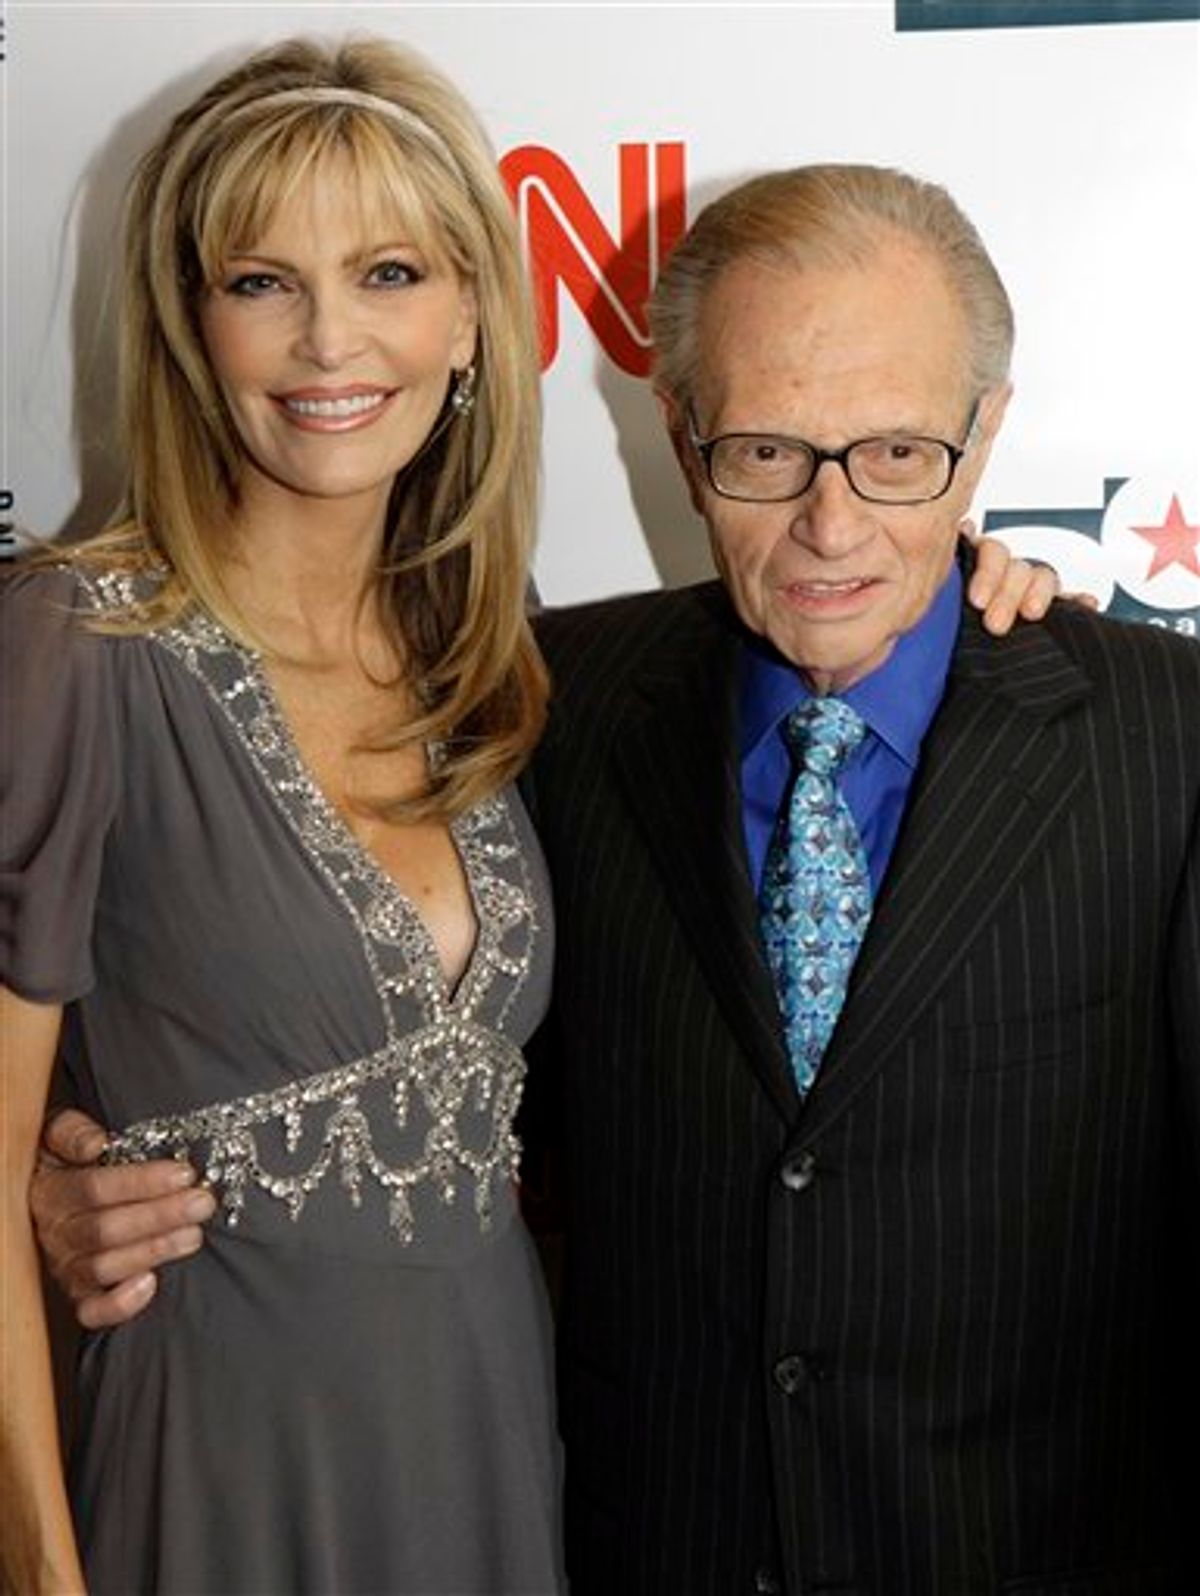 FILE - In this April 18, 2007 file photo, Larry King and his wife Shaun arrive to a party held by CNN celebrating King's fifty years of broadcasting, New York. ( AP Photo/Stuart Ramson, file) (AP)